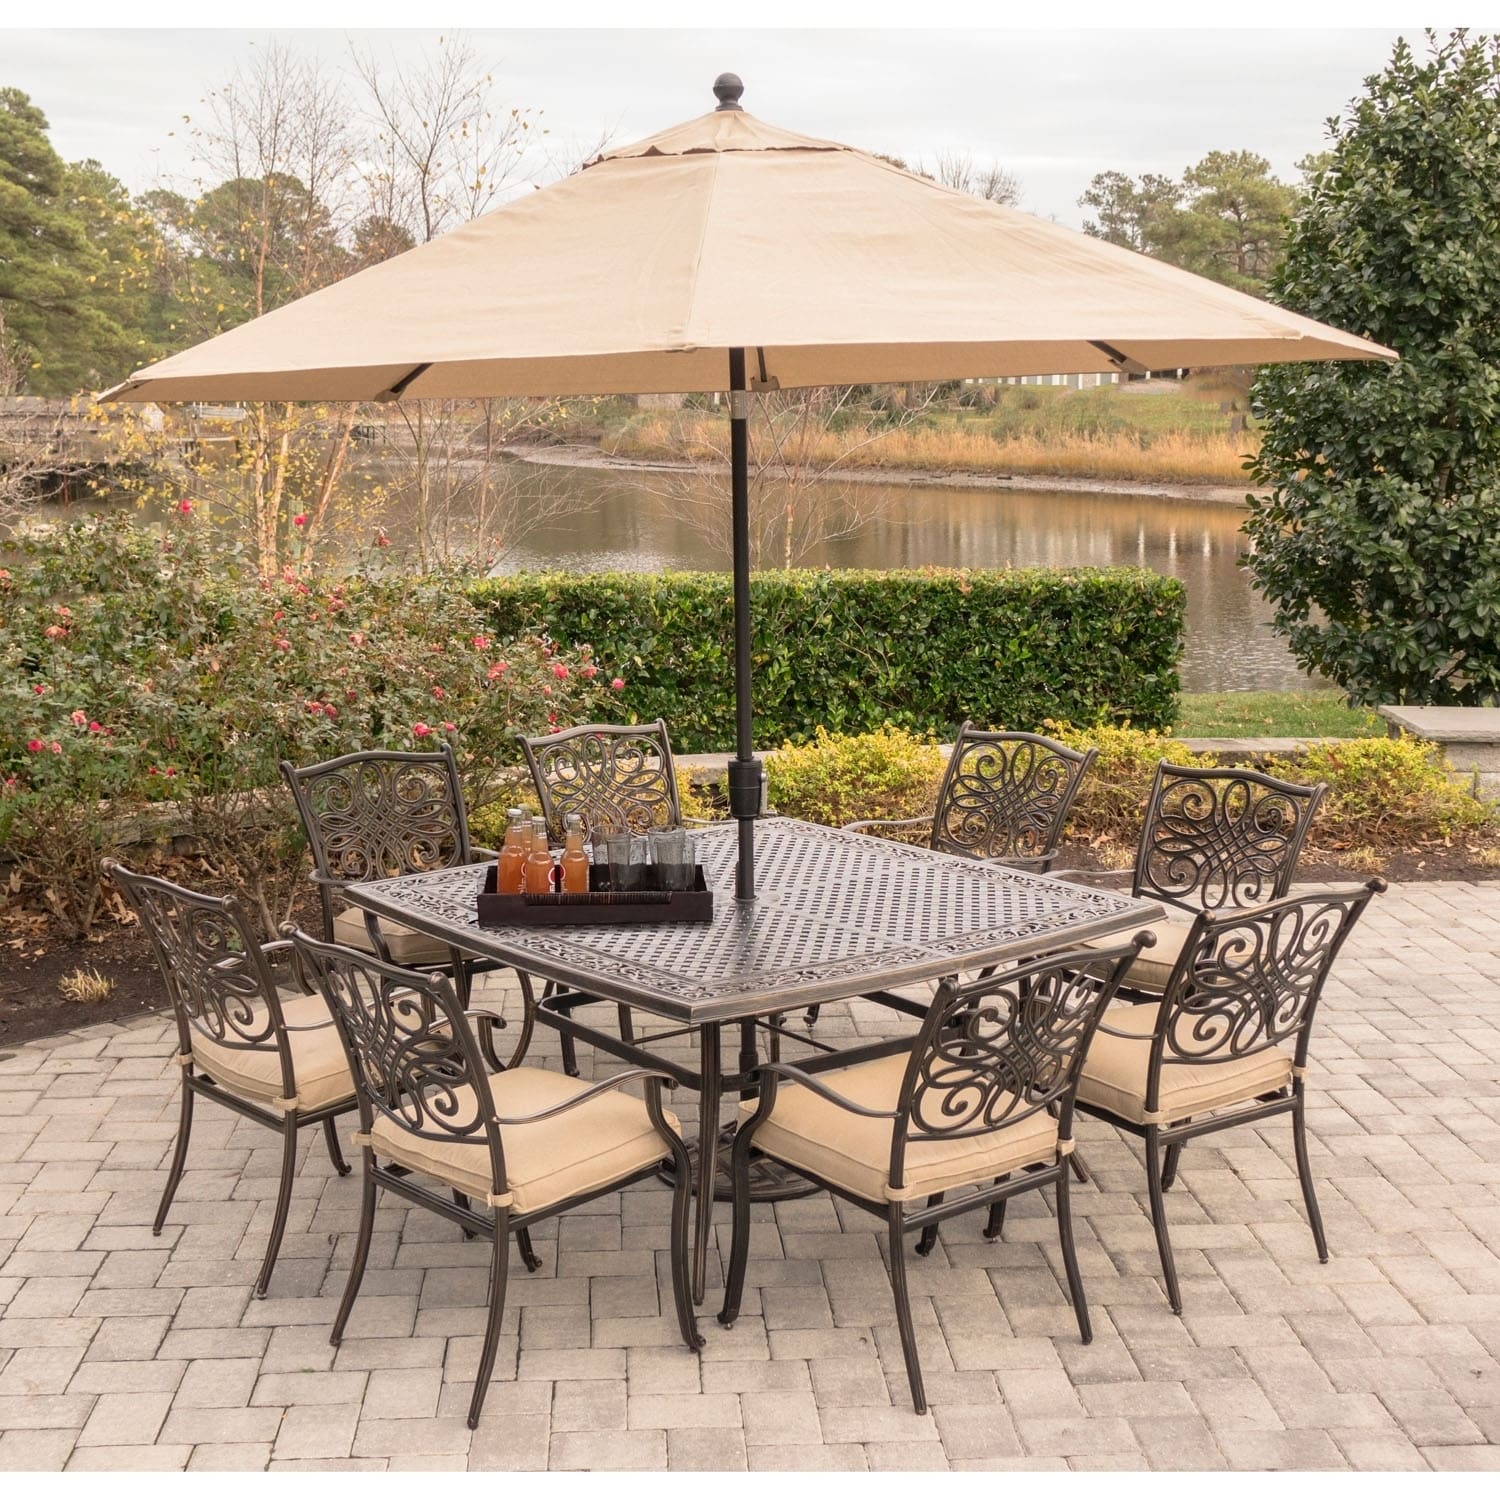 Hanover Traditions 9-piece Dining Set In Tan With Square 60 In. Cast-top Dining Table  11 Ft. Table Umbrella  And Umbrella Base